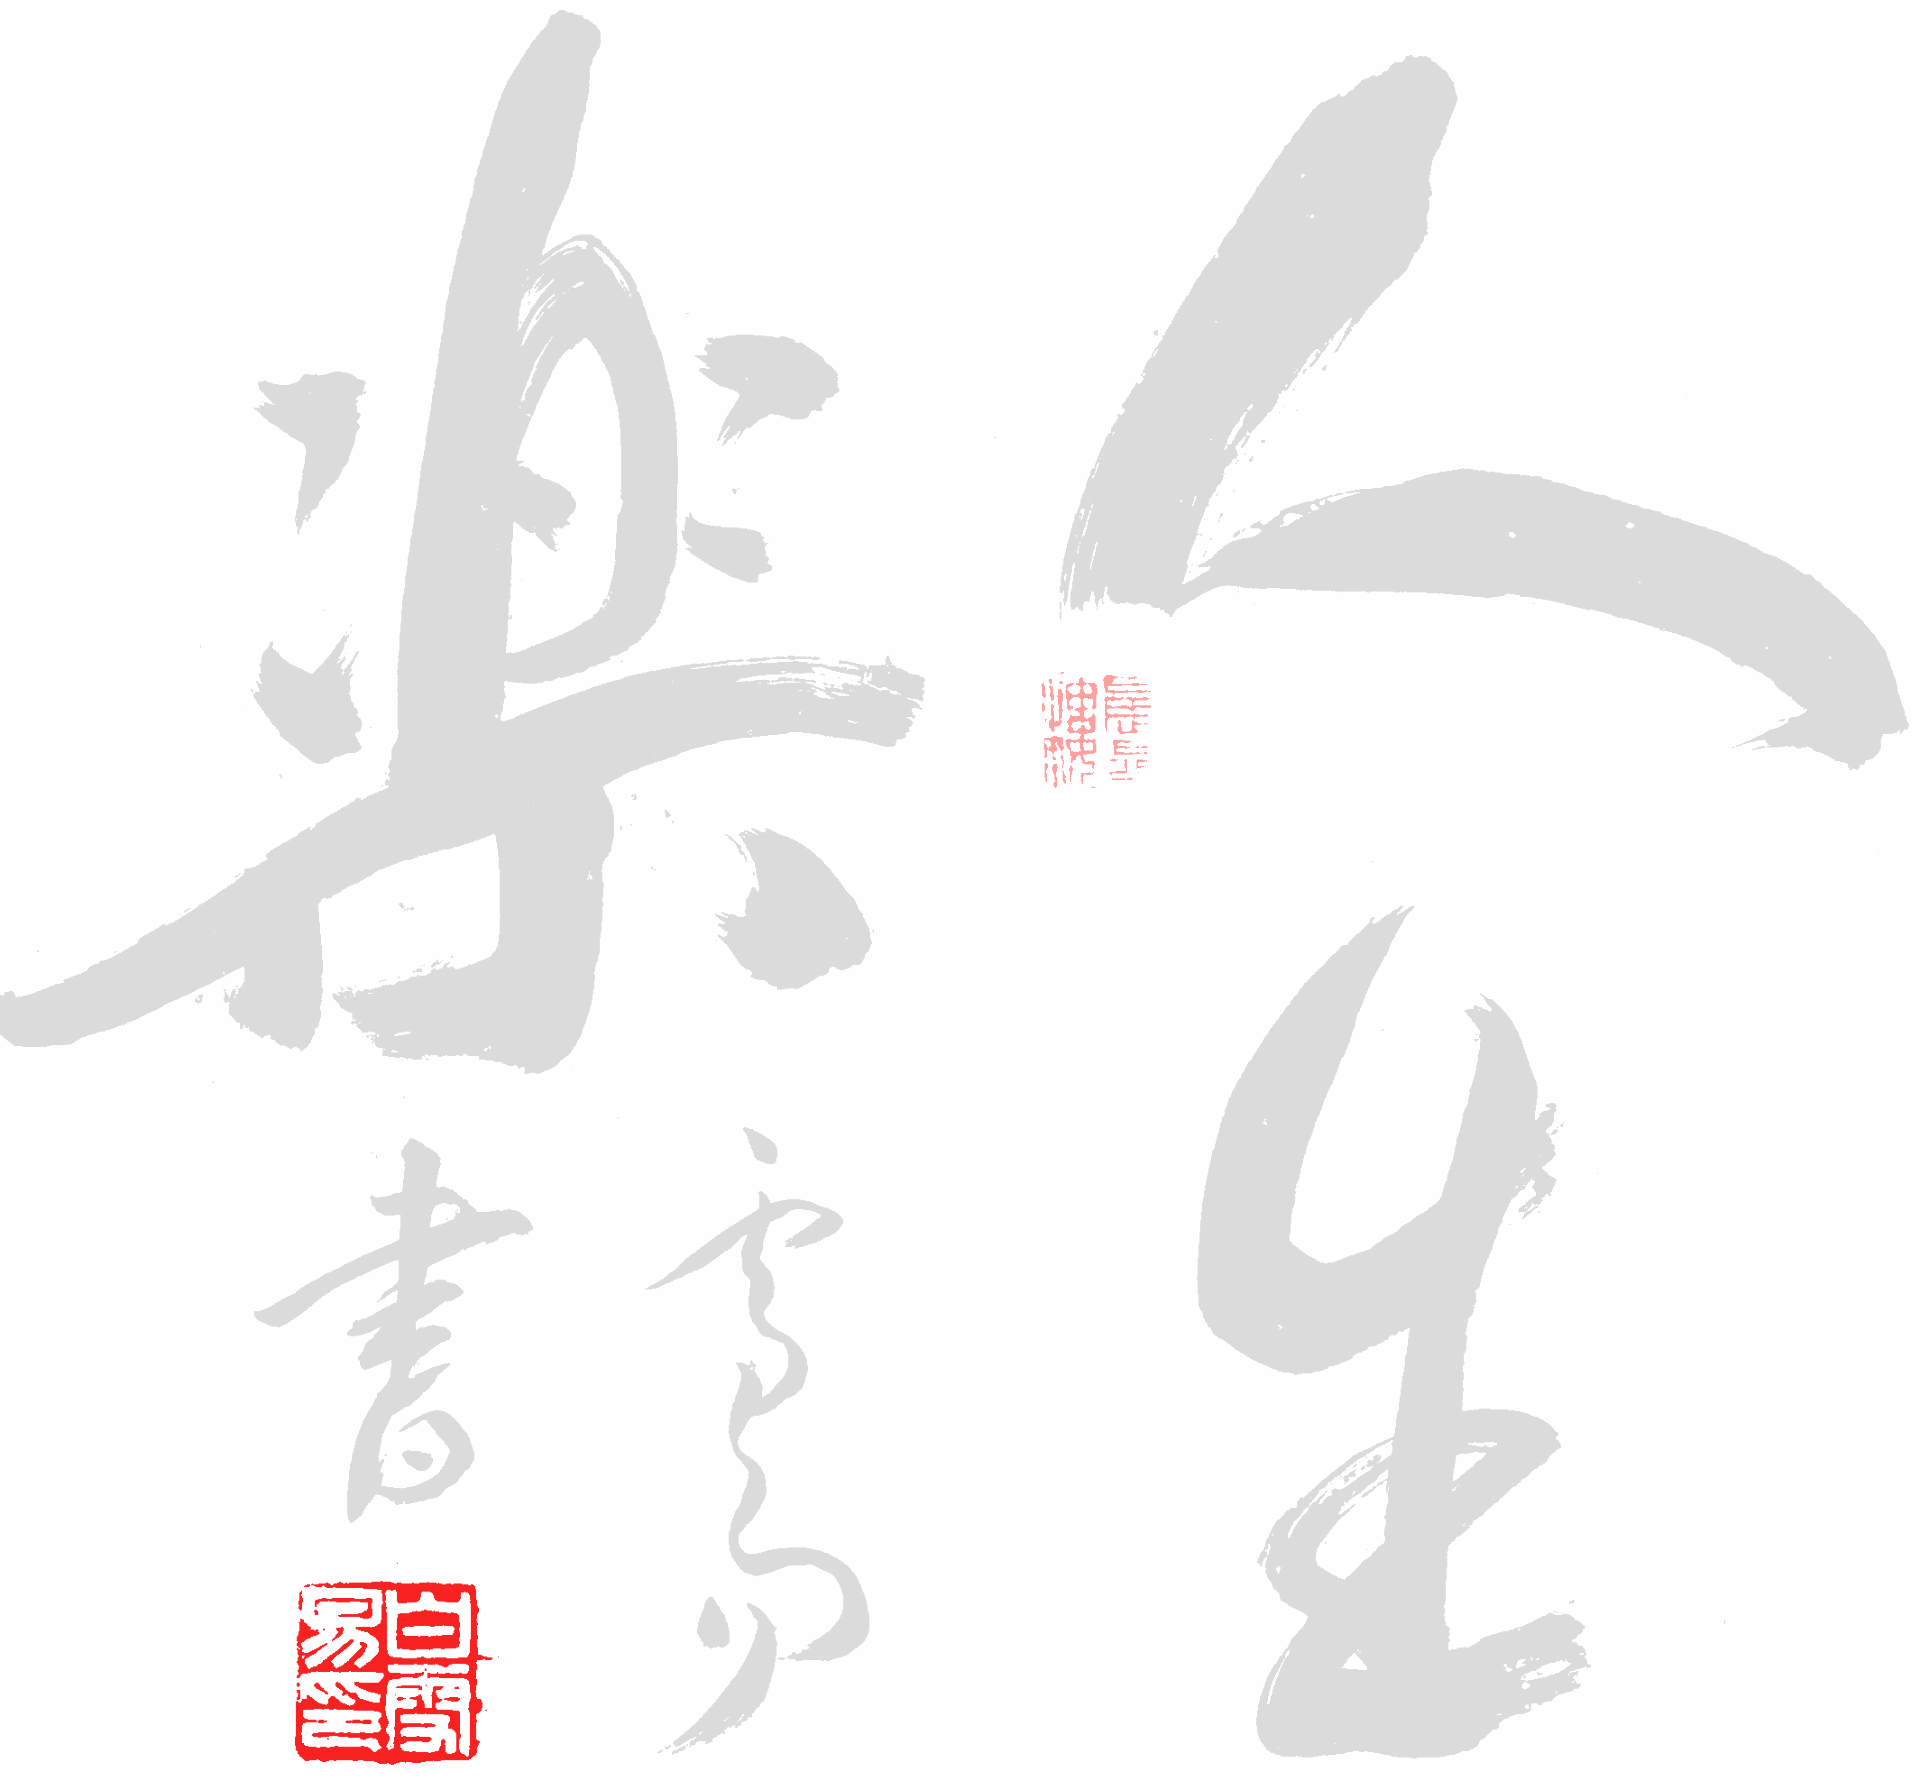 Background image: Chinese calligraphy of happy life